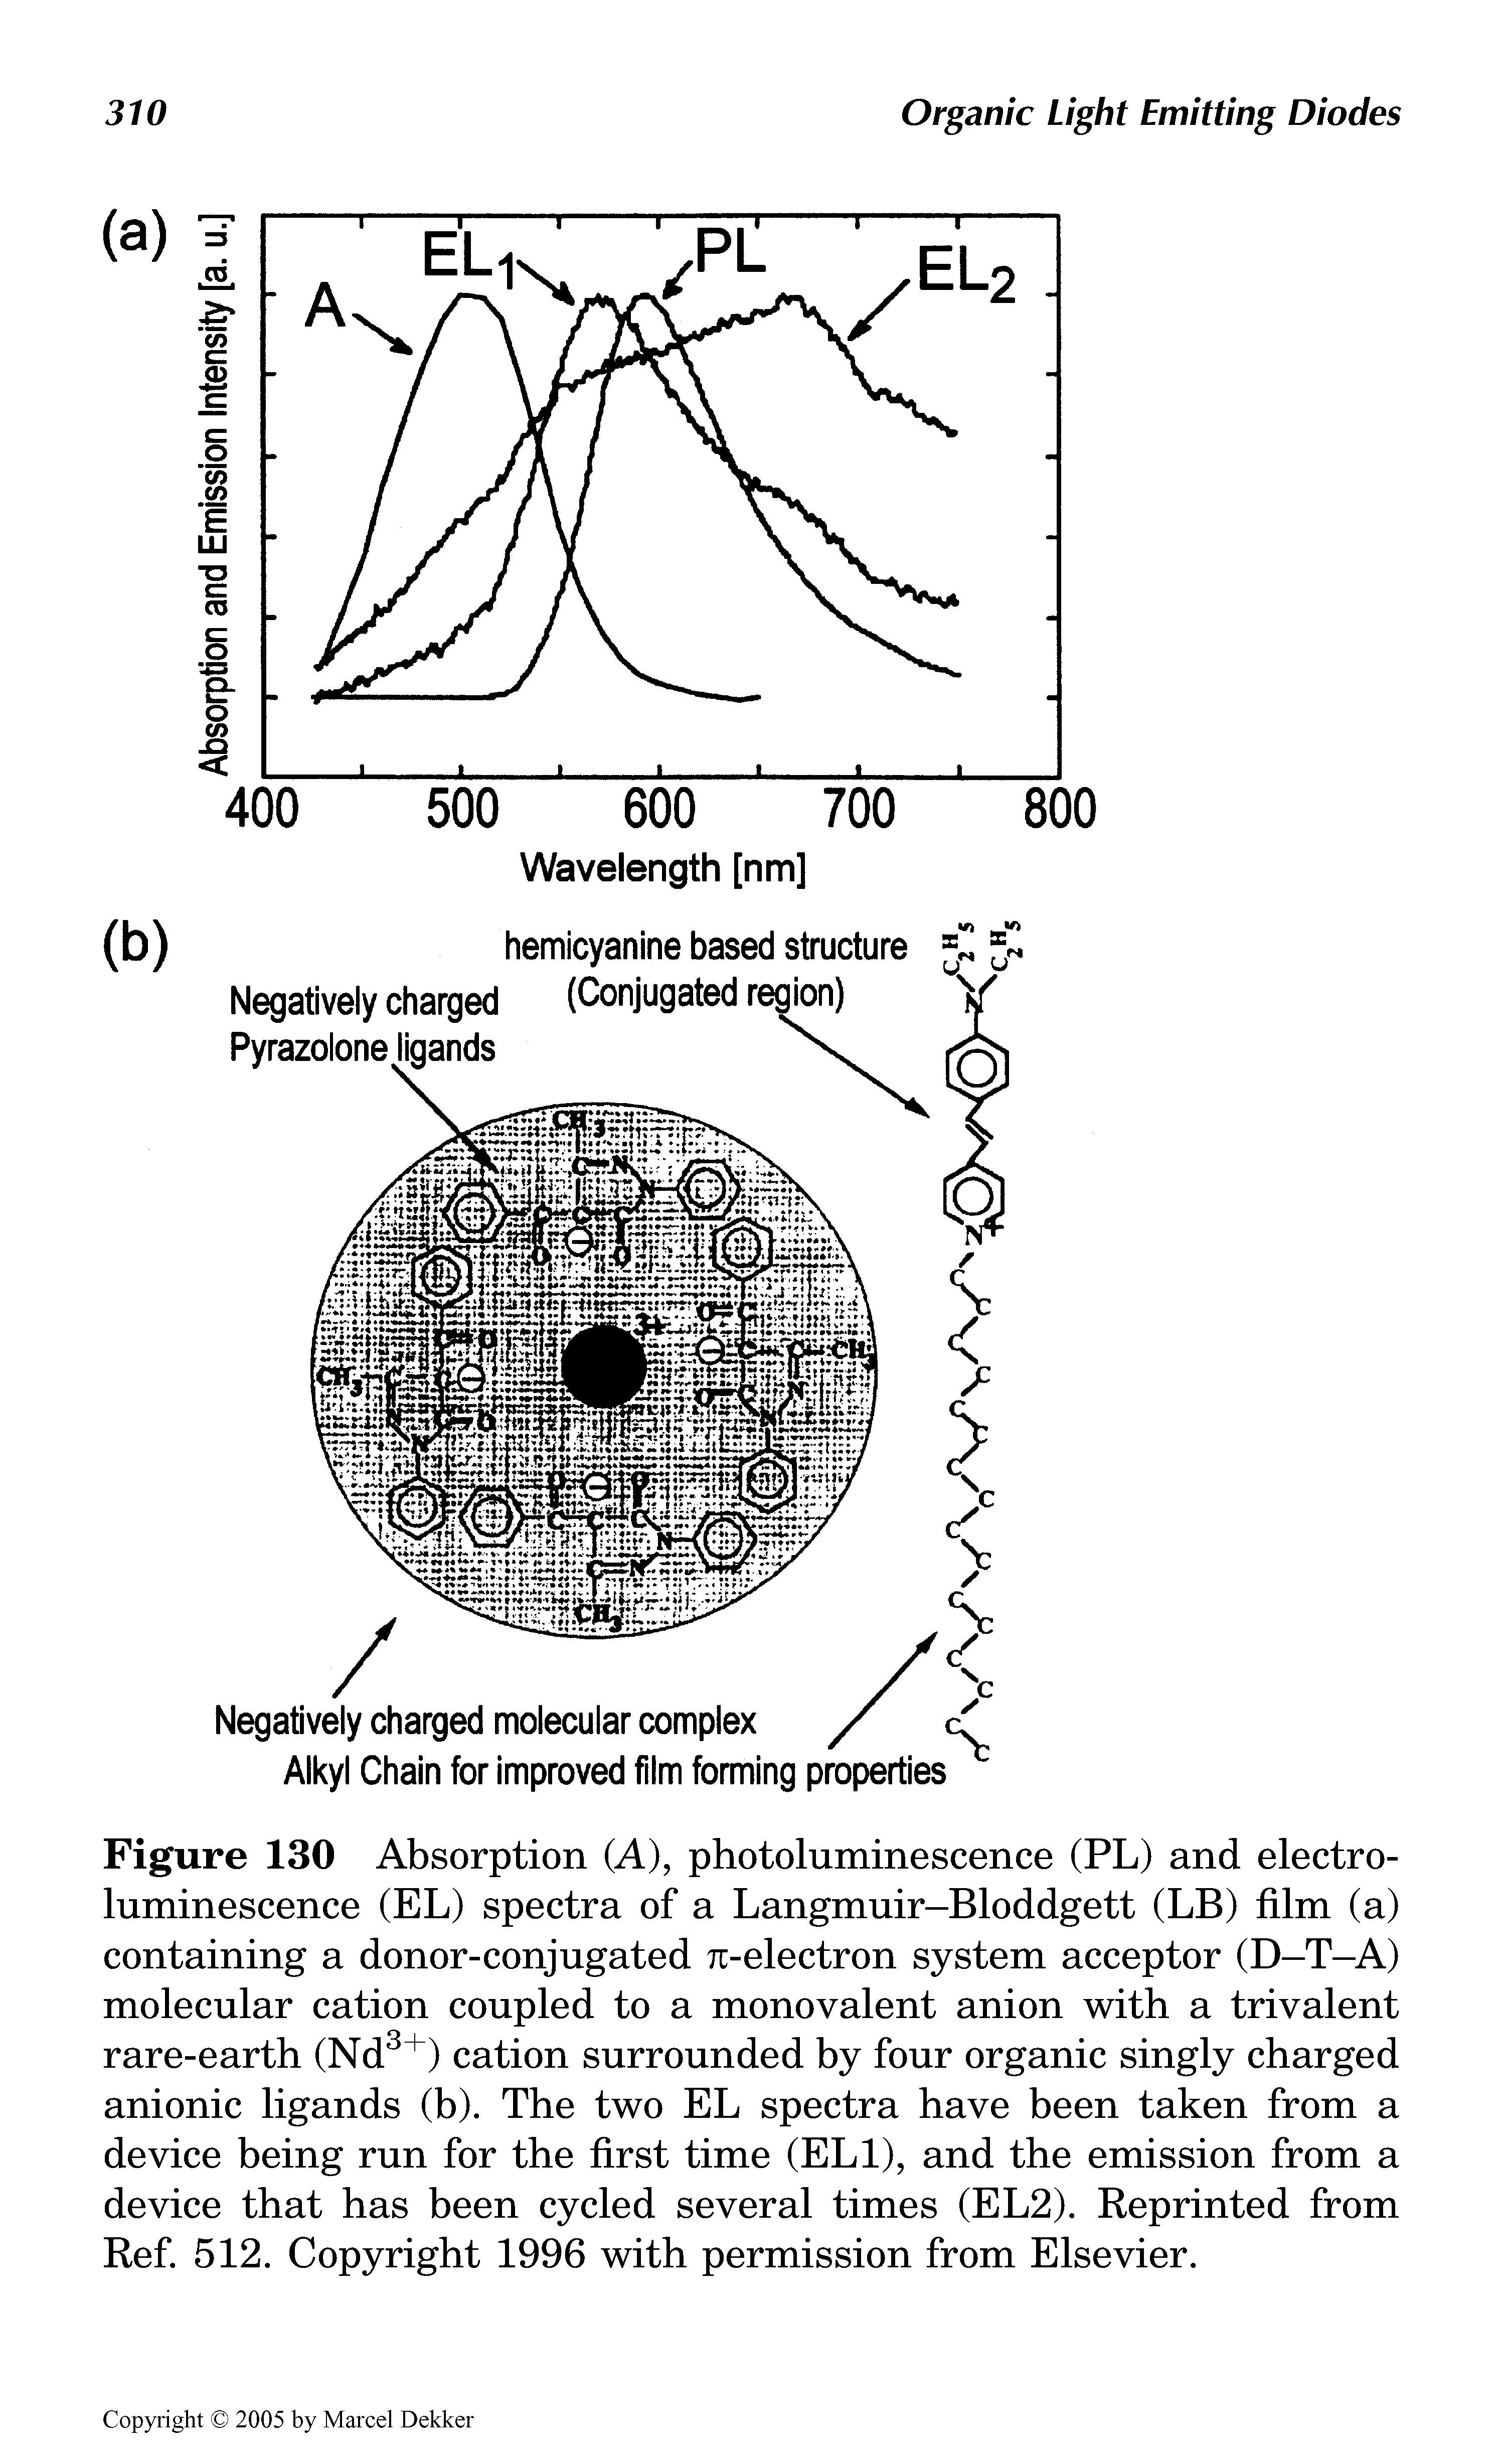 Figure 130 Absorption (A), photoluminescence (PL) and electroluminescence (EL) spectra of a Langmuir-Bloddgett (LB) film (a) containing a donor-conjugated Ti-electron system acceptor (D-T-A) molecular cation coupled to a monovalent anion with a trivalent rare-earth (Nd3+) cation surrounded by four organic singly charged anionic ligands (b). The two EL spectra have been taken from a device being run for the first time (ELI), and the emission from a device that has been cycled several times (EL2). Reprinted from Ref. 512. Copyright 1996 with permission from Elsevier.